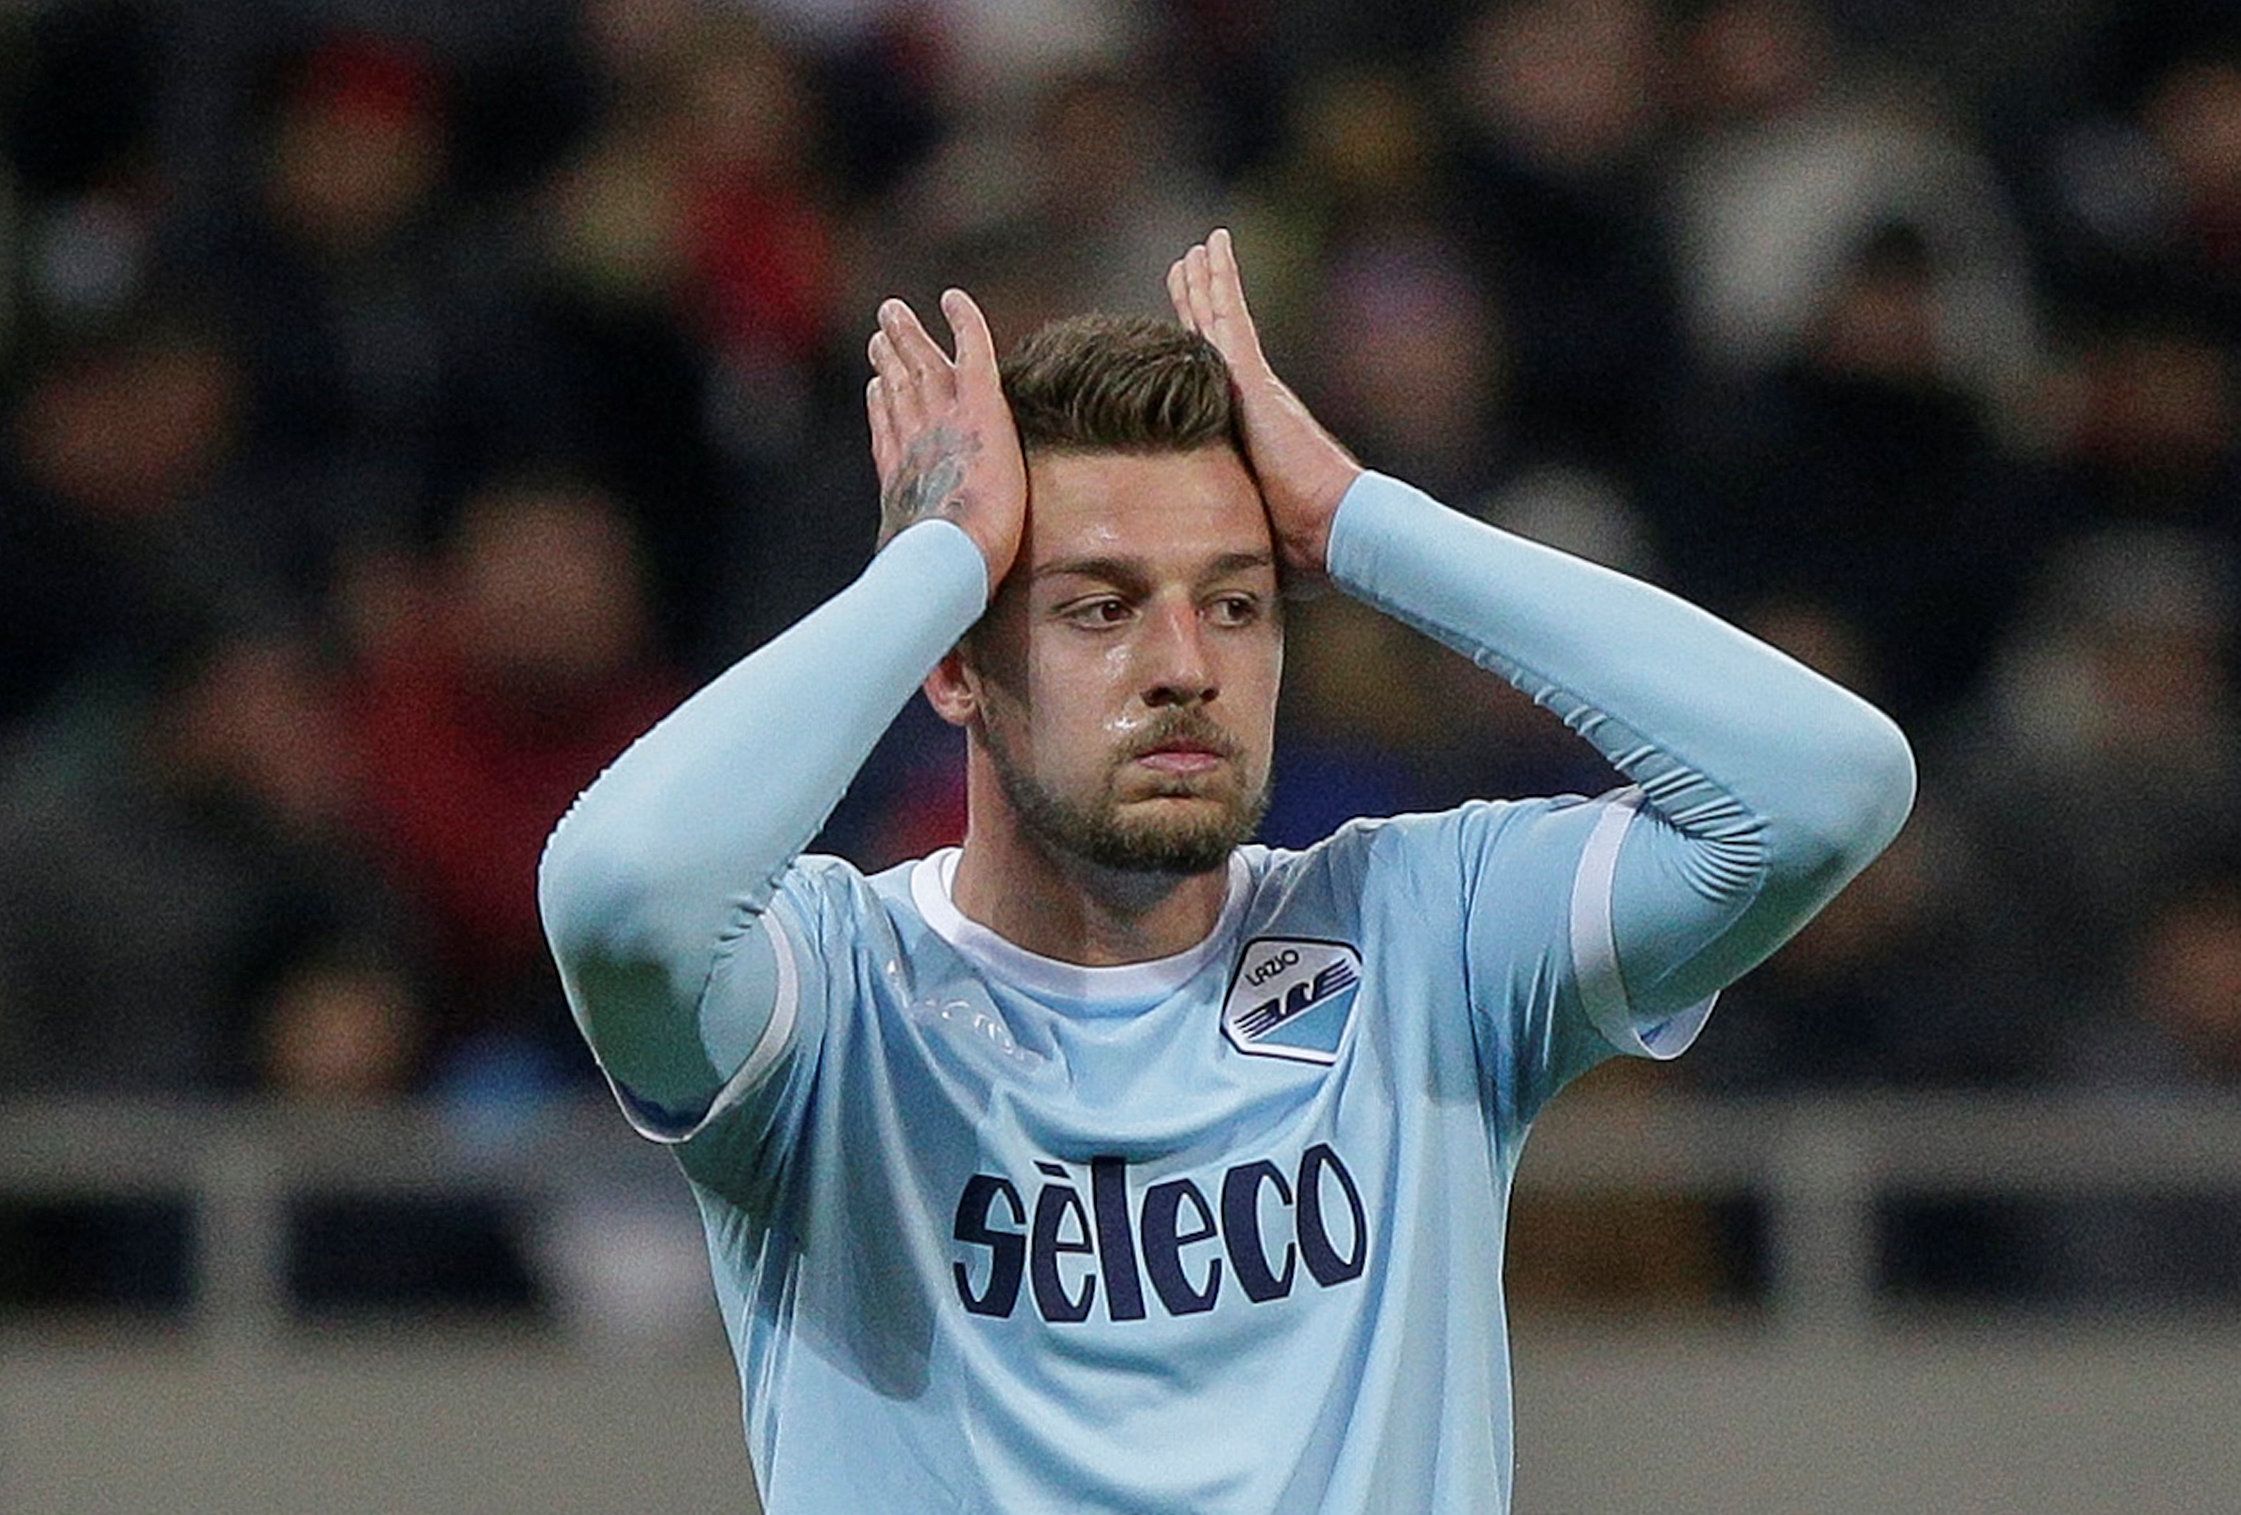 Soccer Football - Europa League Round of 32 First Leg - Steaua Bucharest vs Lazio - National Arena, Bucharest, Romania - February 15, 2018  Lazio’s Sergej Milinkovic-Savic looks dejected   Inquam Photos/Octav Ganea via REUTERS  ROMANIA OUT. NO COMMERCIAL OR EDITORIAL SALES IN ROMANIA THIS IMAGE HAS BEEN SUPPLIED BY A THIRD PARTY. IT IS DISTRIBUTED, EXACTLY AS RECEIVED BY REUTERS, AS A SERVICE TO CLIENTS